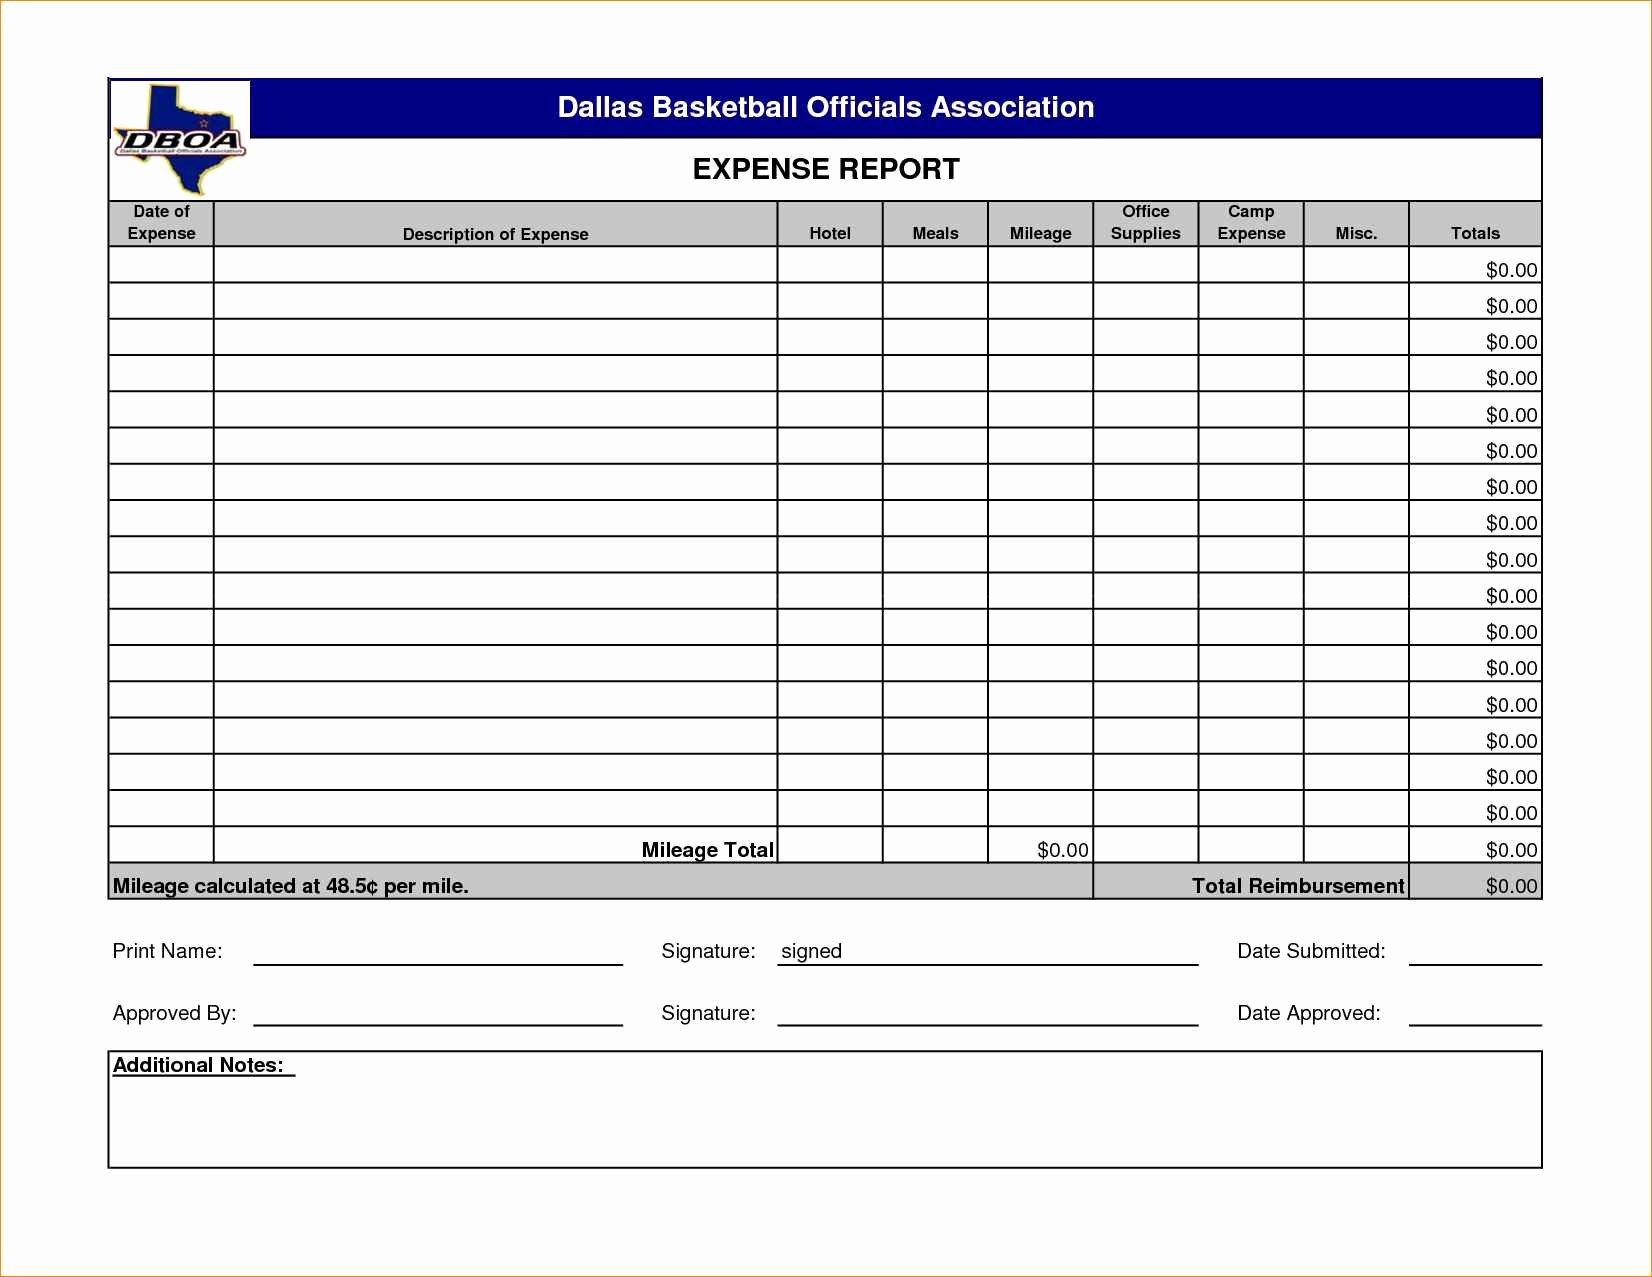 Expense Report Example and Expense Report Template for